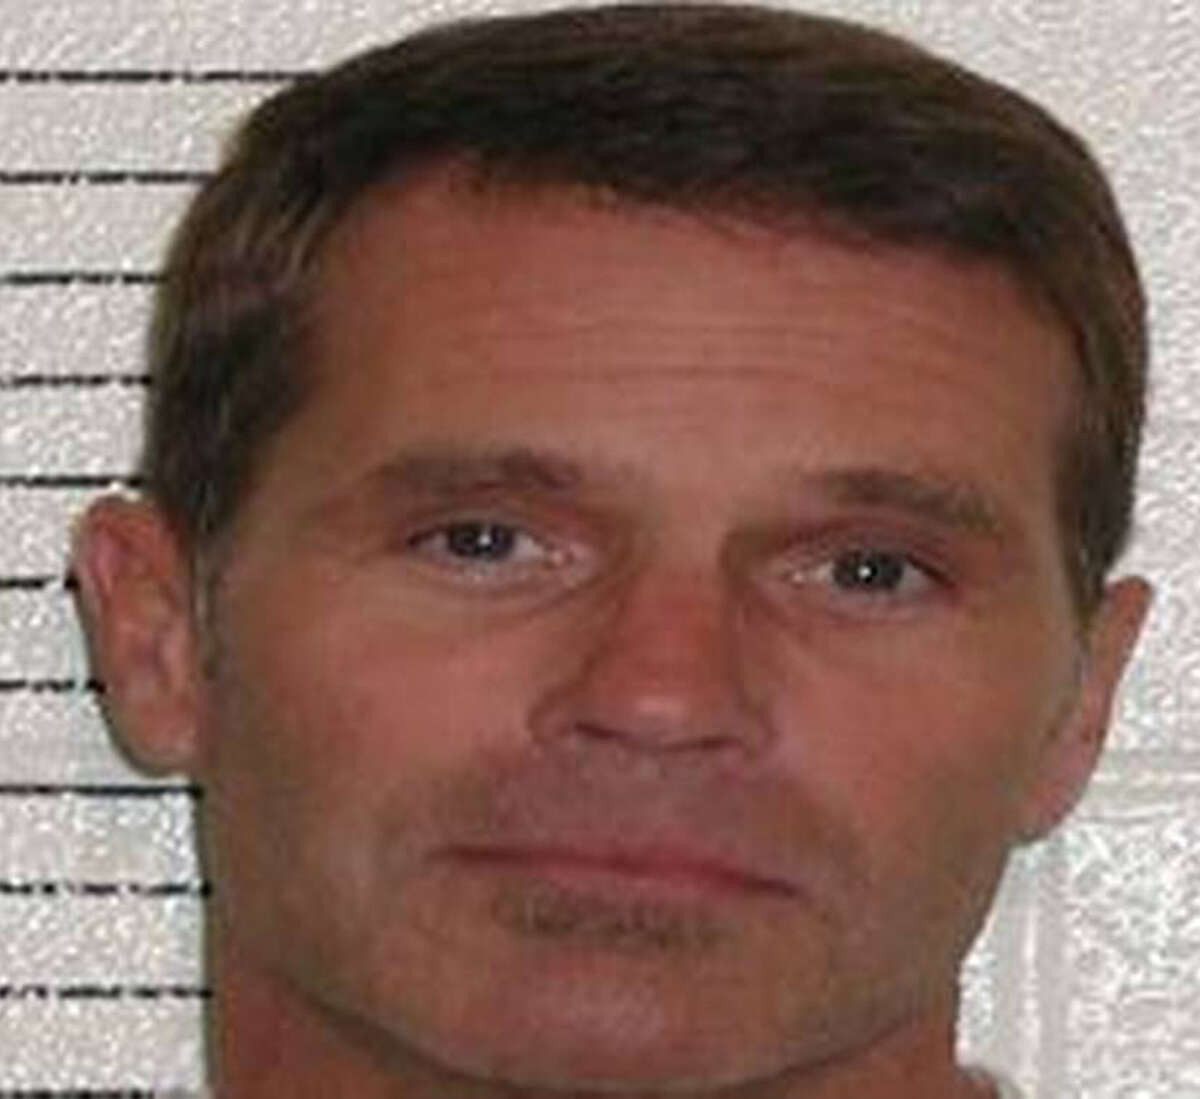 Frederick Darren Berg, the biggest fraud in Washington state history, disappeared Wednesday, Dec. 6, 2017, from U.S. Penitentiary Atwater’s Satellite Prison Camp outside Merced, Calif. He was serving an 18-year prison term.